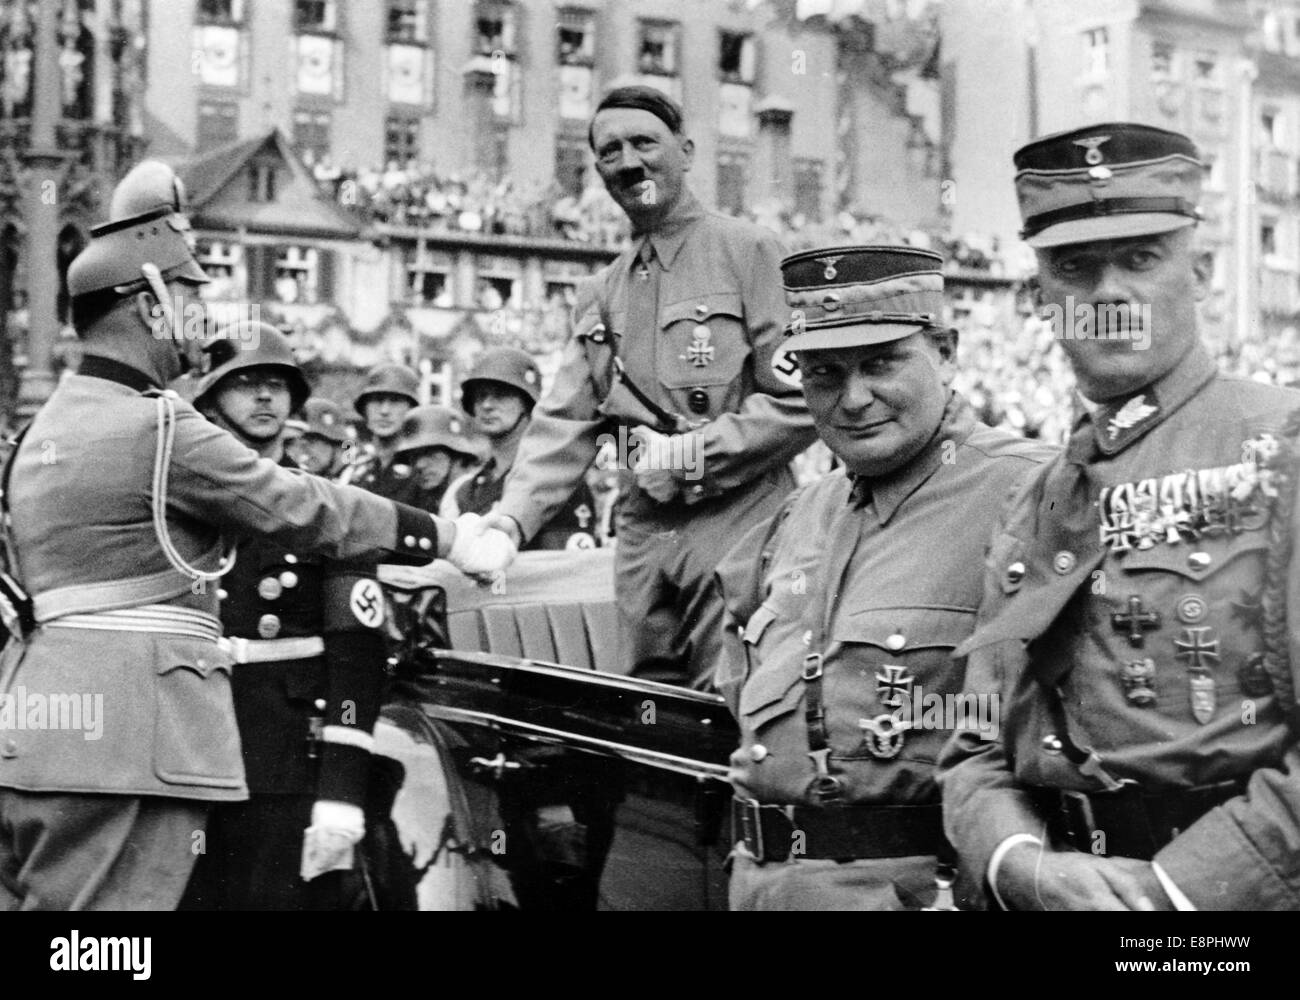 Nuremberg Rally 1938 in Nuremberg, Germany - Adolf Hitler greets Chief of the German Police Kurt Daluege on the occasion of the march-past of the police on Adolf-Hitler-Square. On the left Reichsfuehrer of the Schutzstaffel (SS) Heinrich Himmler. On the right Reich Minister Hermann Goering and Schustzstaffel (SA) official Franz von Pfeffer (R). (Flaws in quality due to the historic picture copy) Fotoarchiv für Zeitgeschichtee - NO WIRE SERVICE - Stock Photo